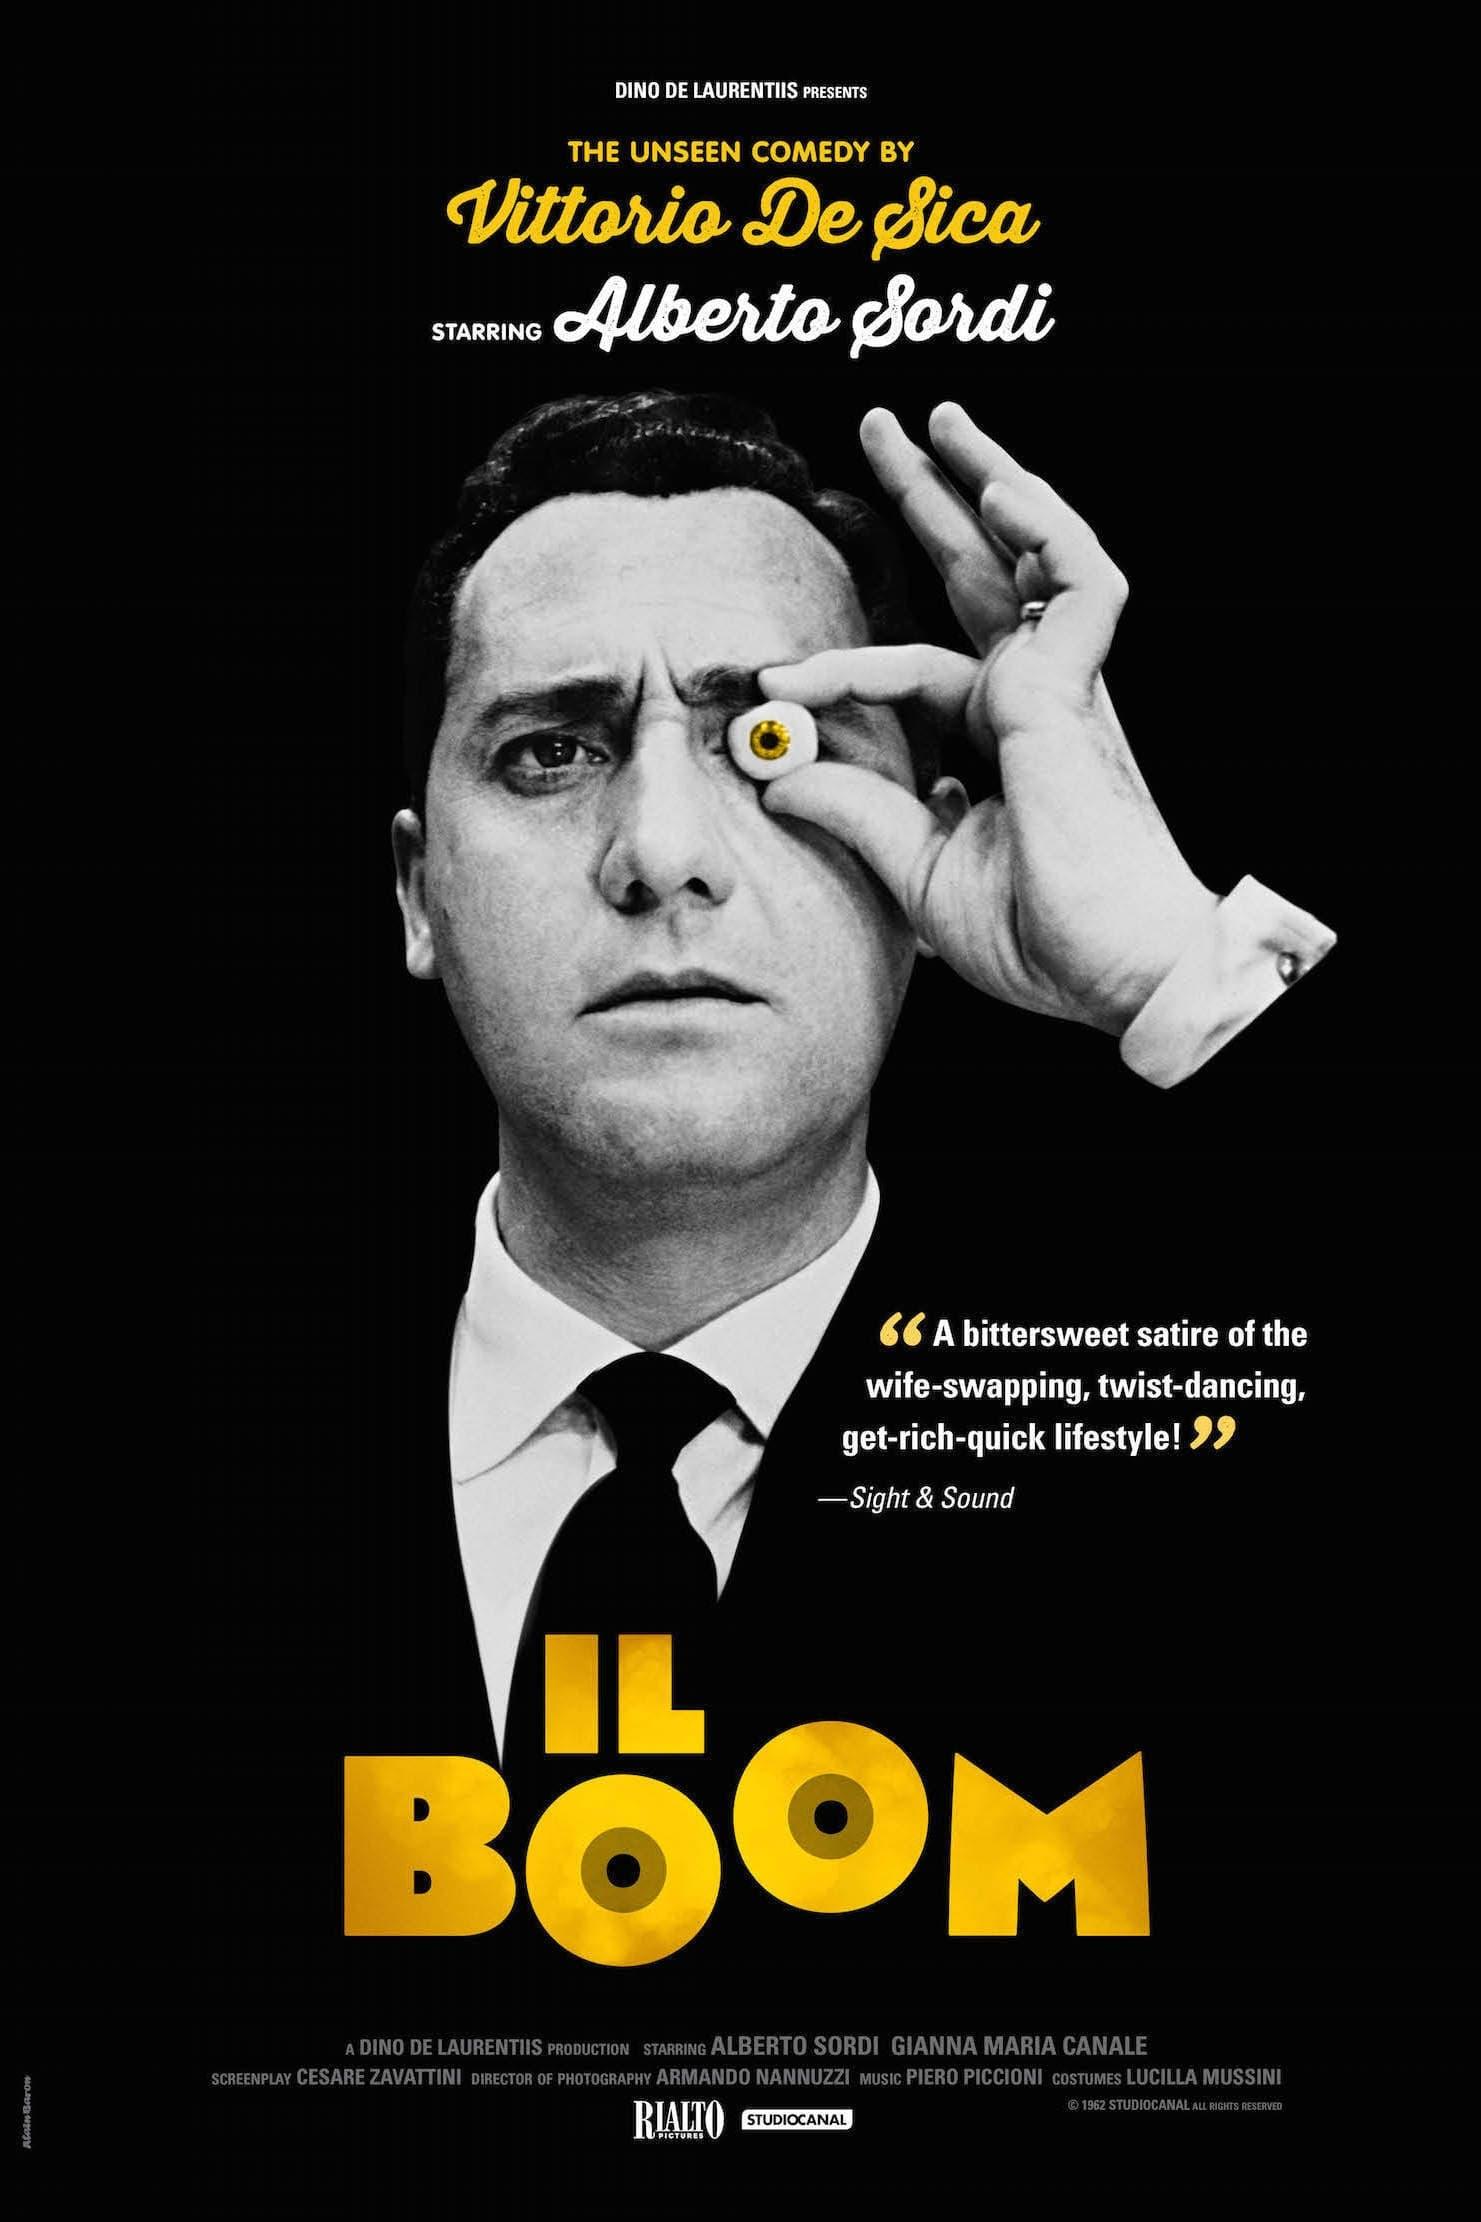 The Boom poster